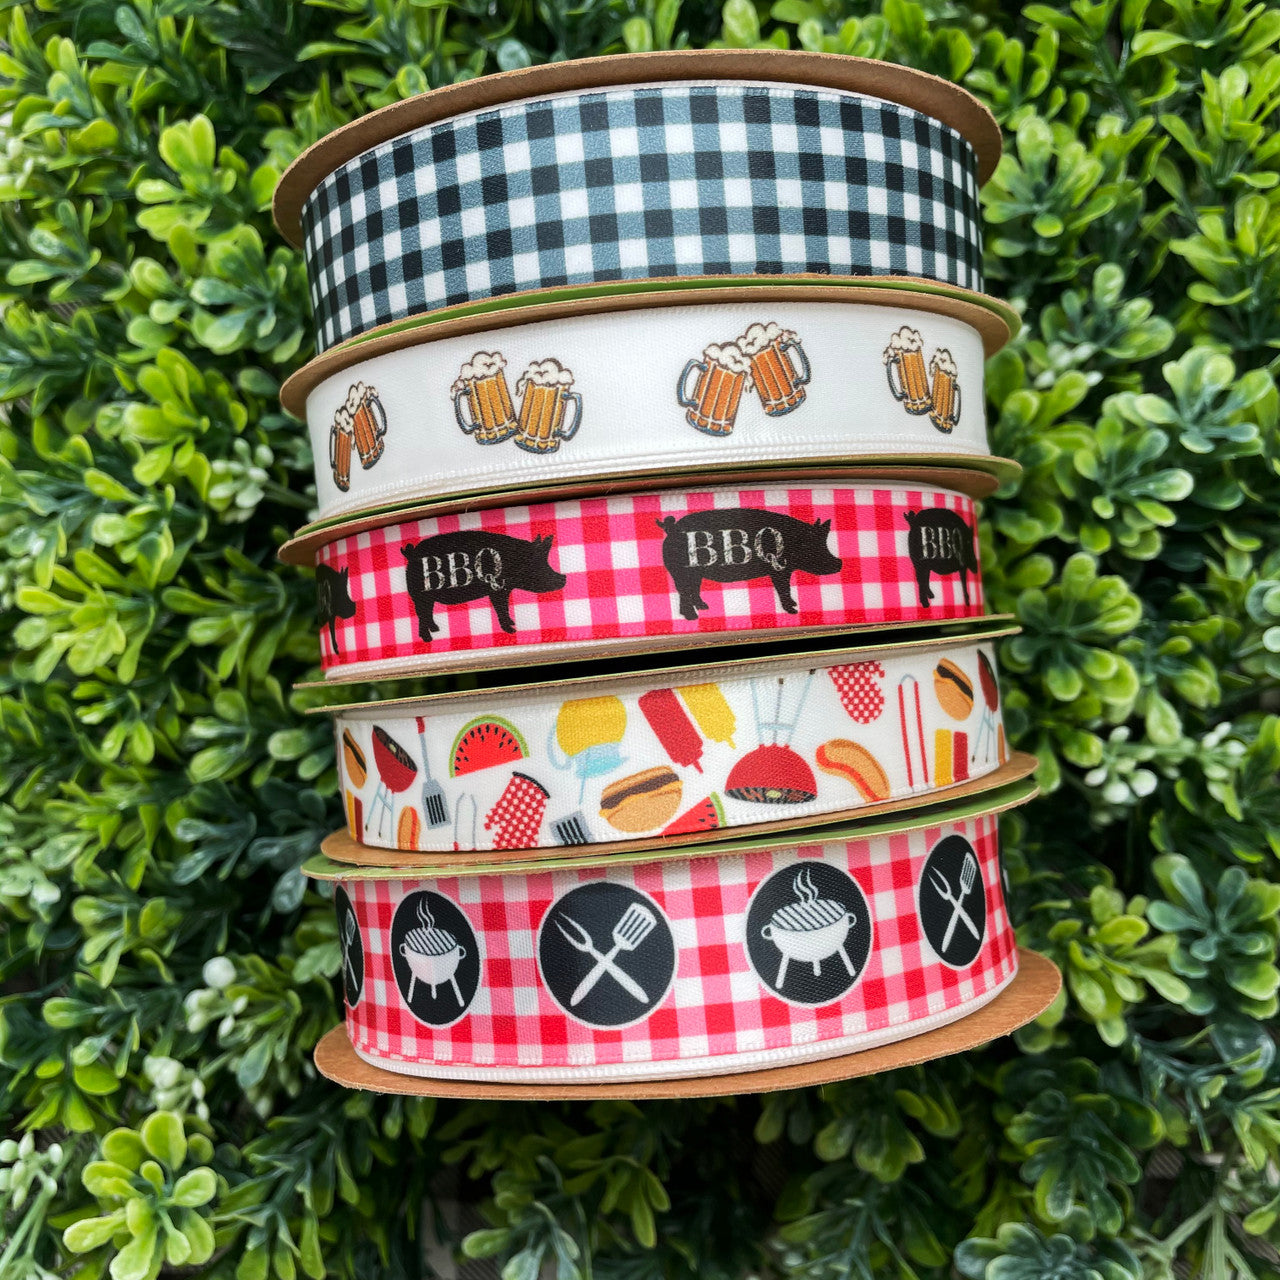 We have an array of barbecue themed ribbons perfect for every event and occasion! Use the 5/8" ribbons for party decor and favors! The 7/8" ribbons are perfect for gift wrap and center pieces for the tables!